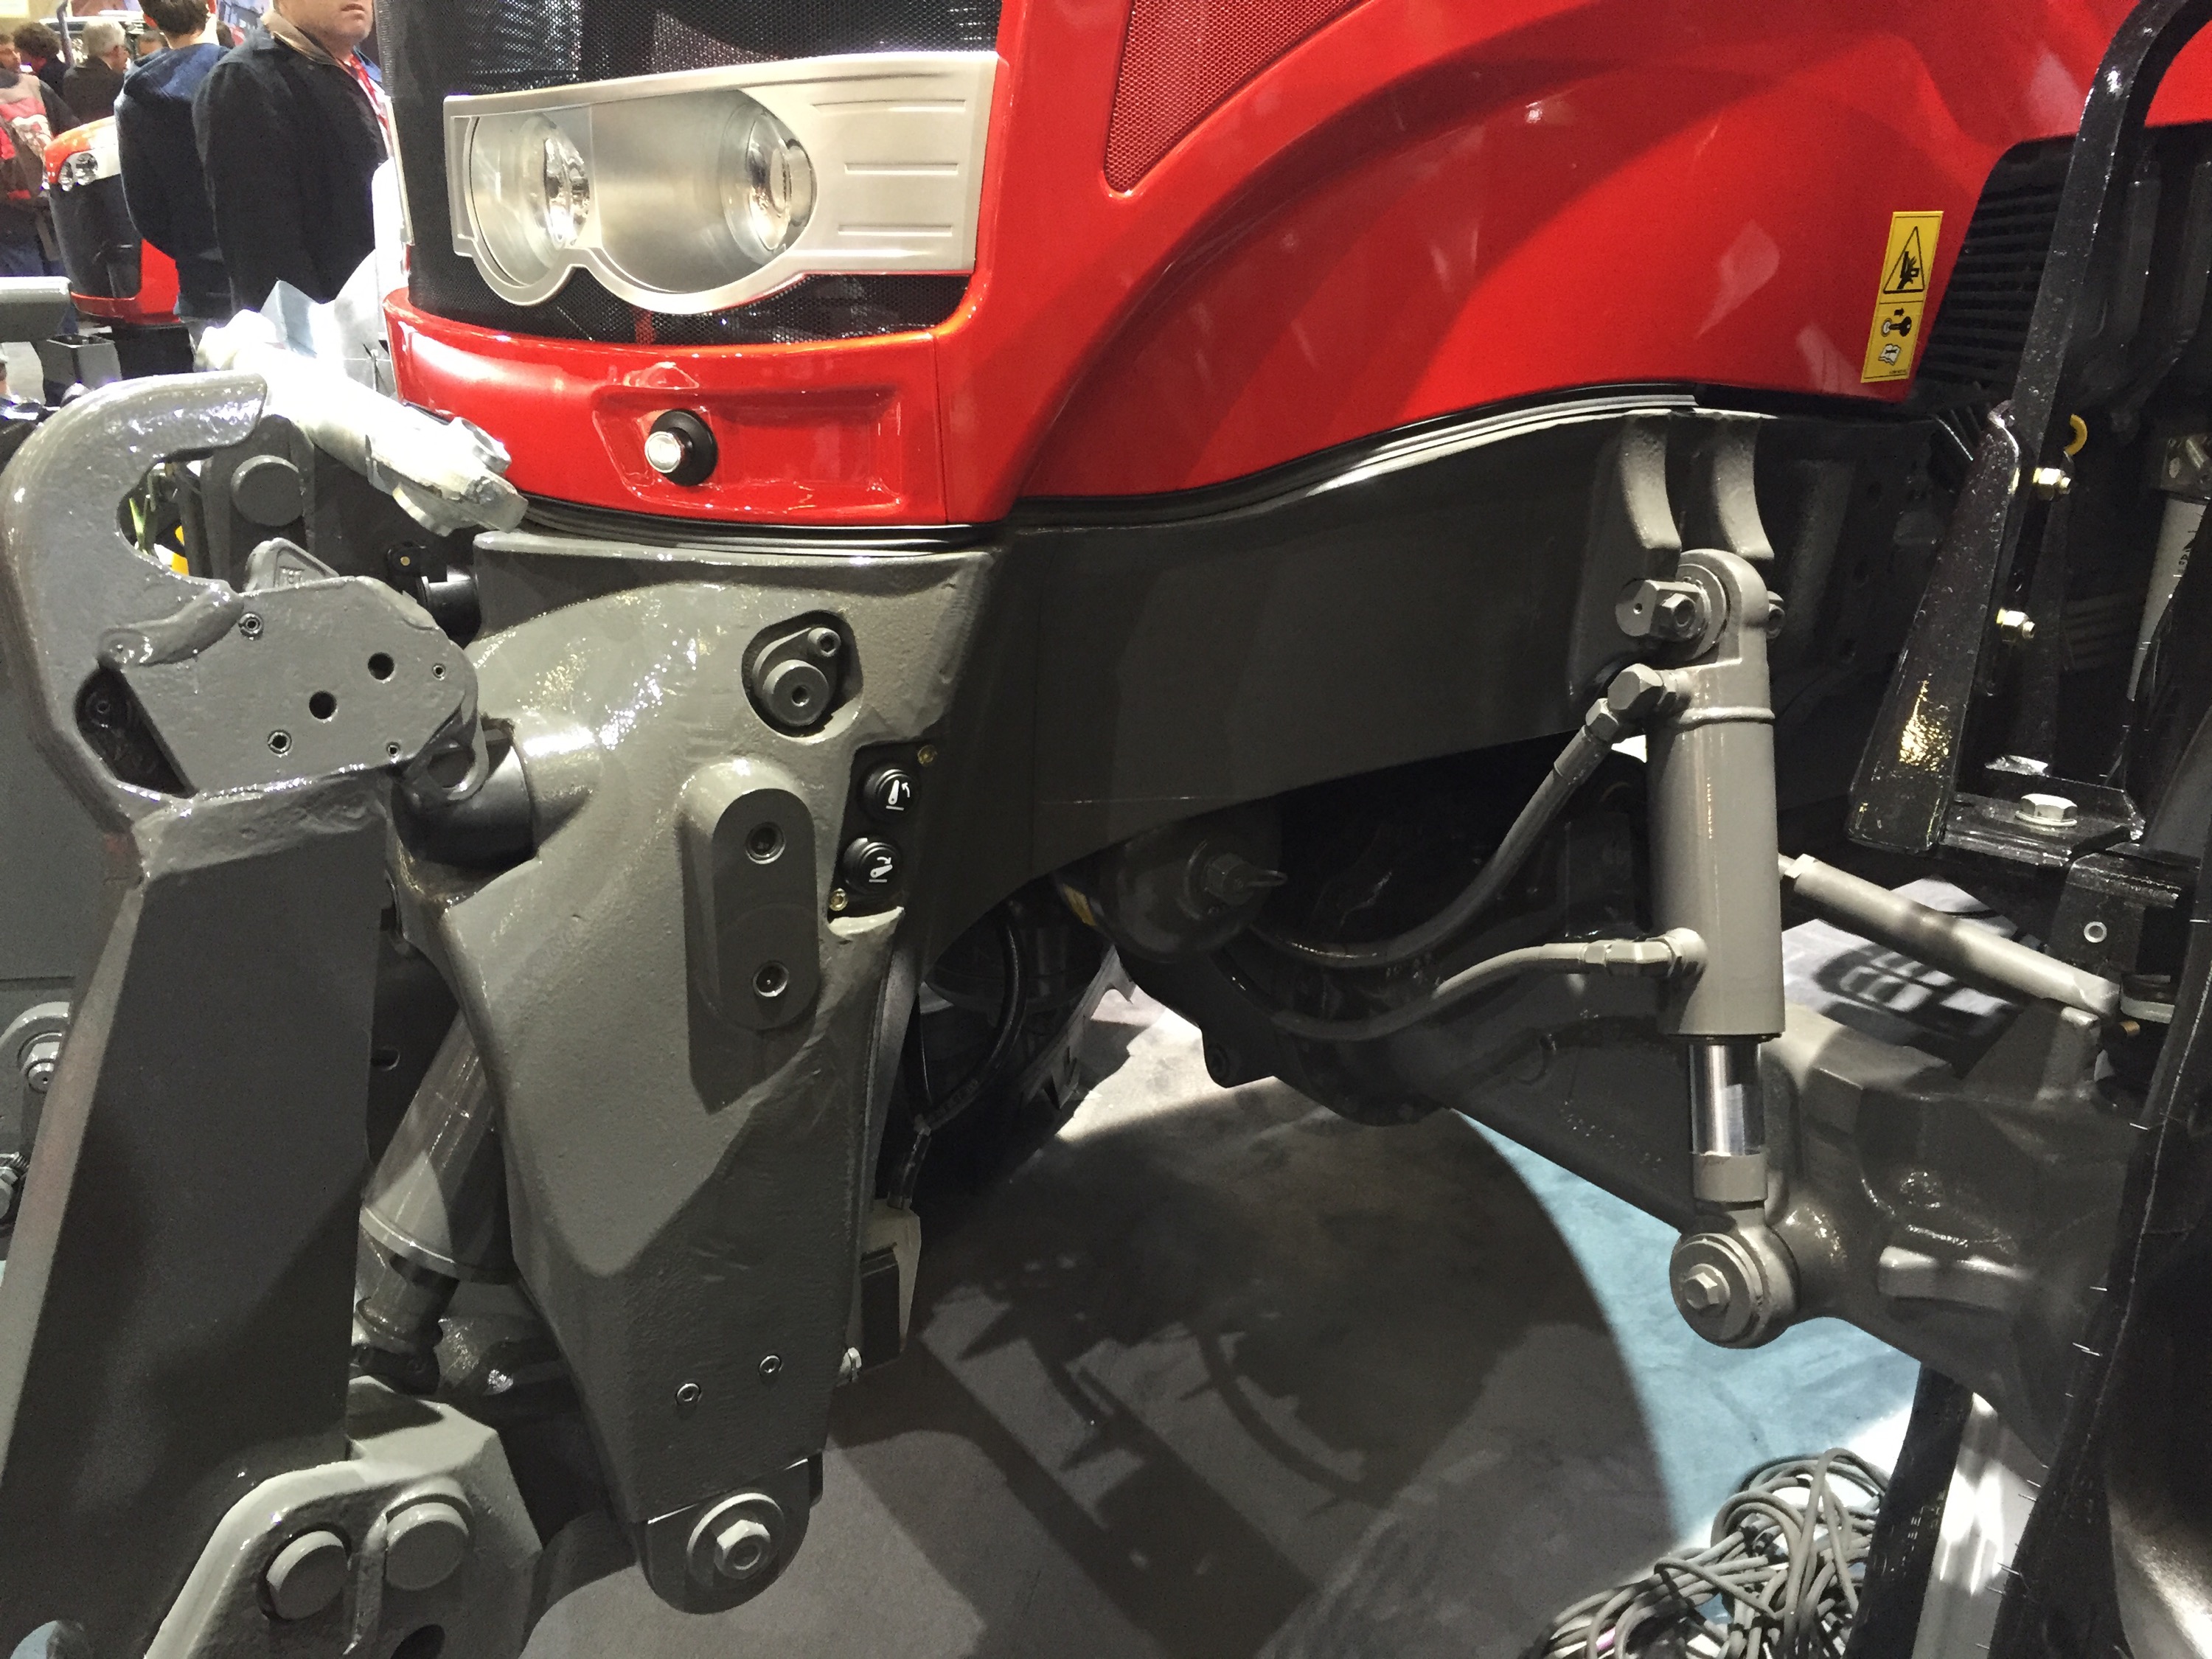 New 140mm travel front suspension with increased turning angle & travel